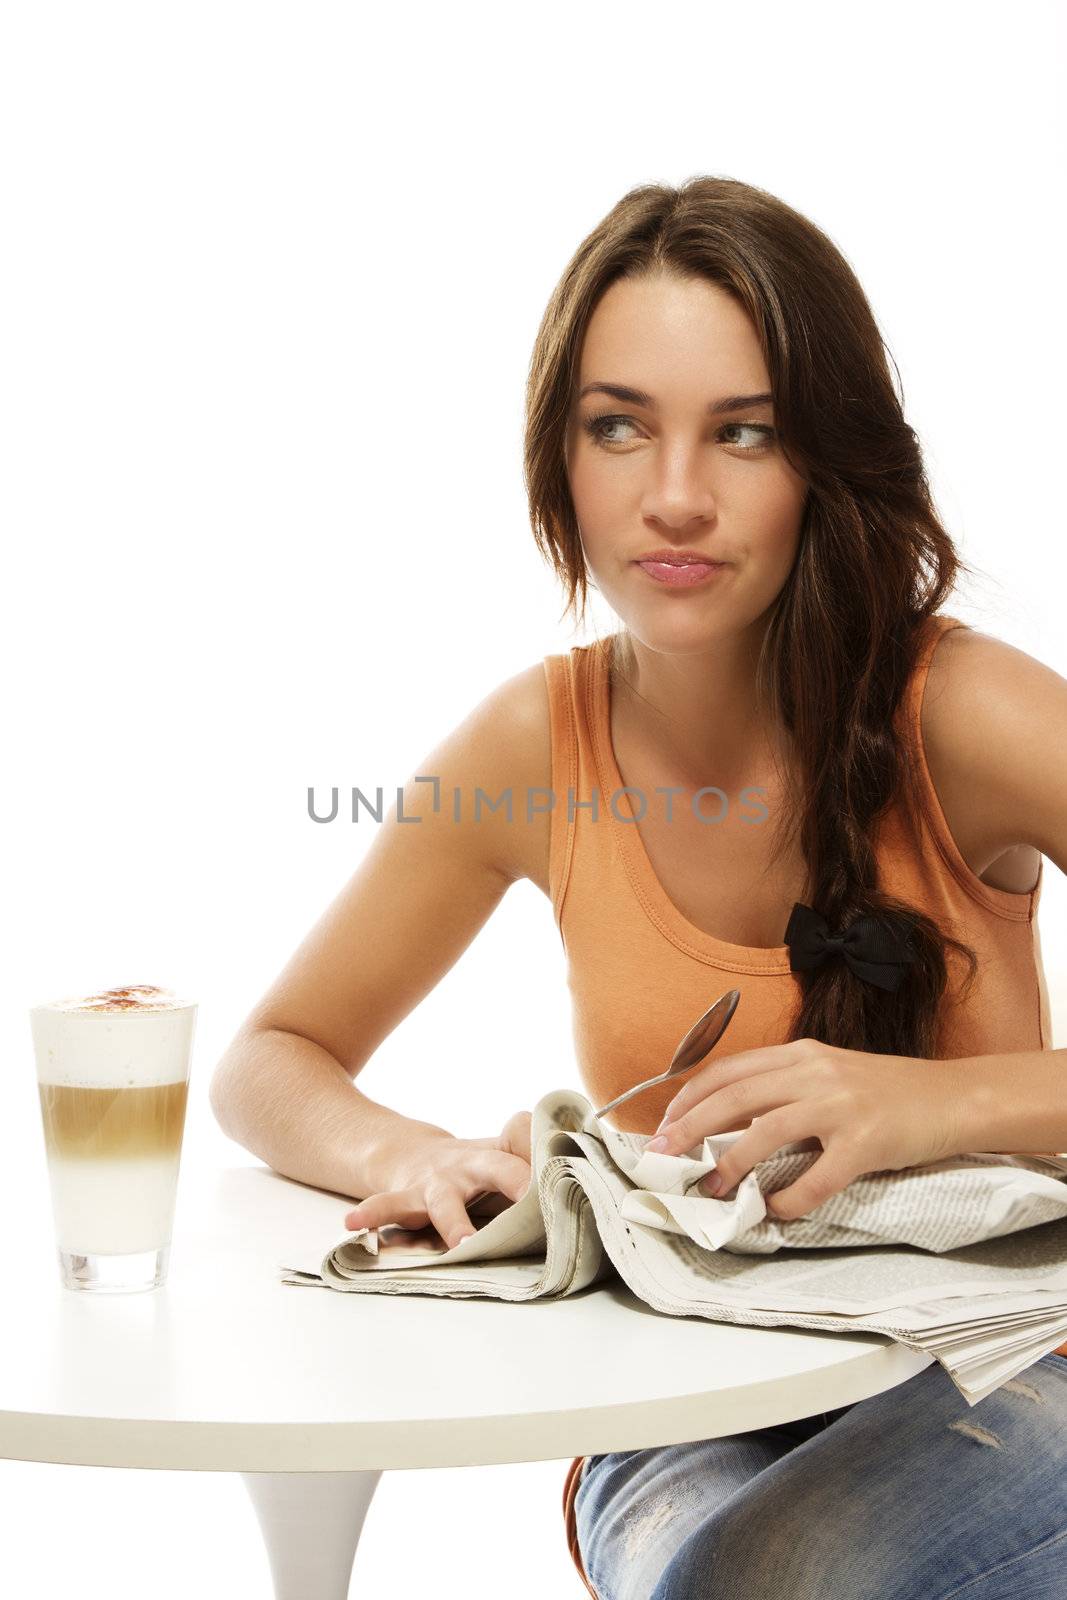 upset young woman with newspaper and latte macchiato at a table by RobStark